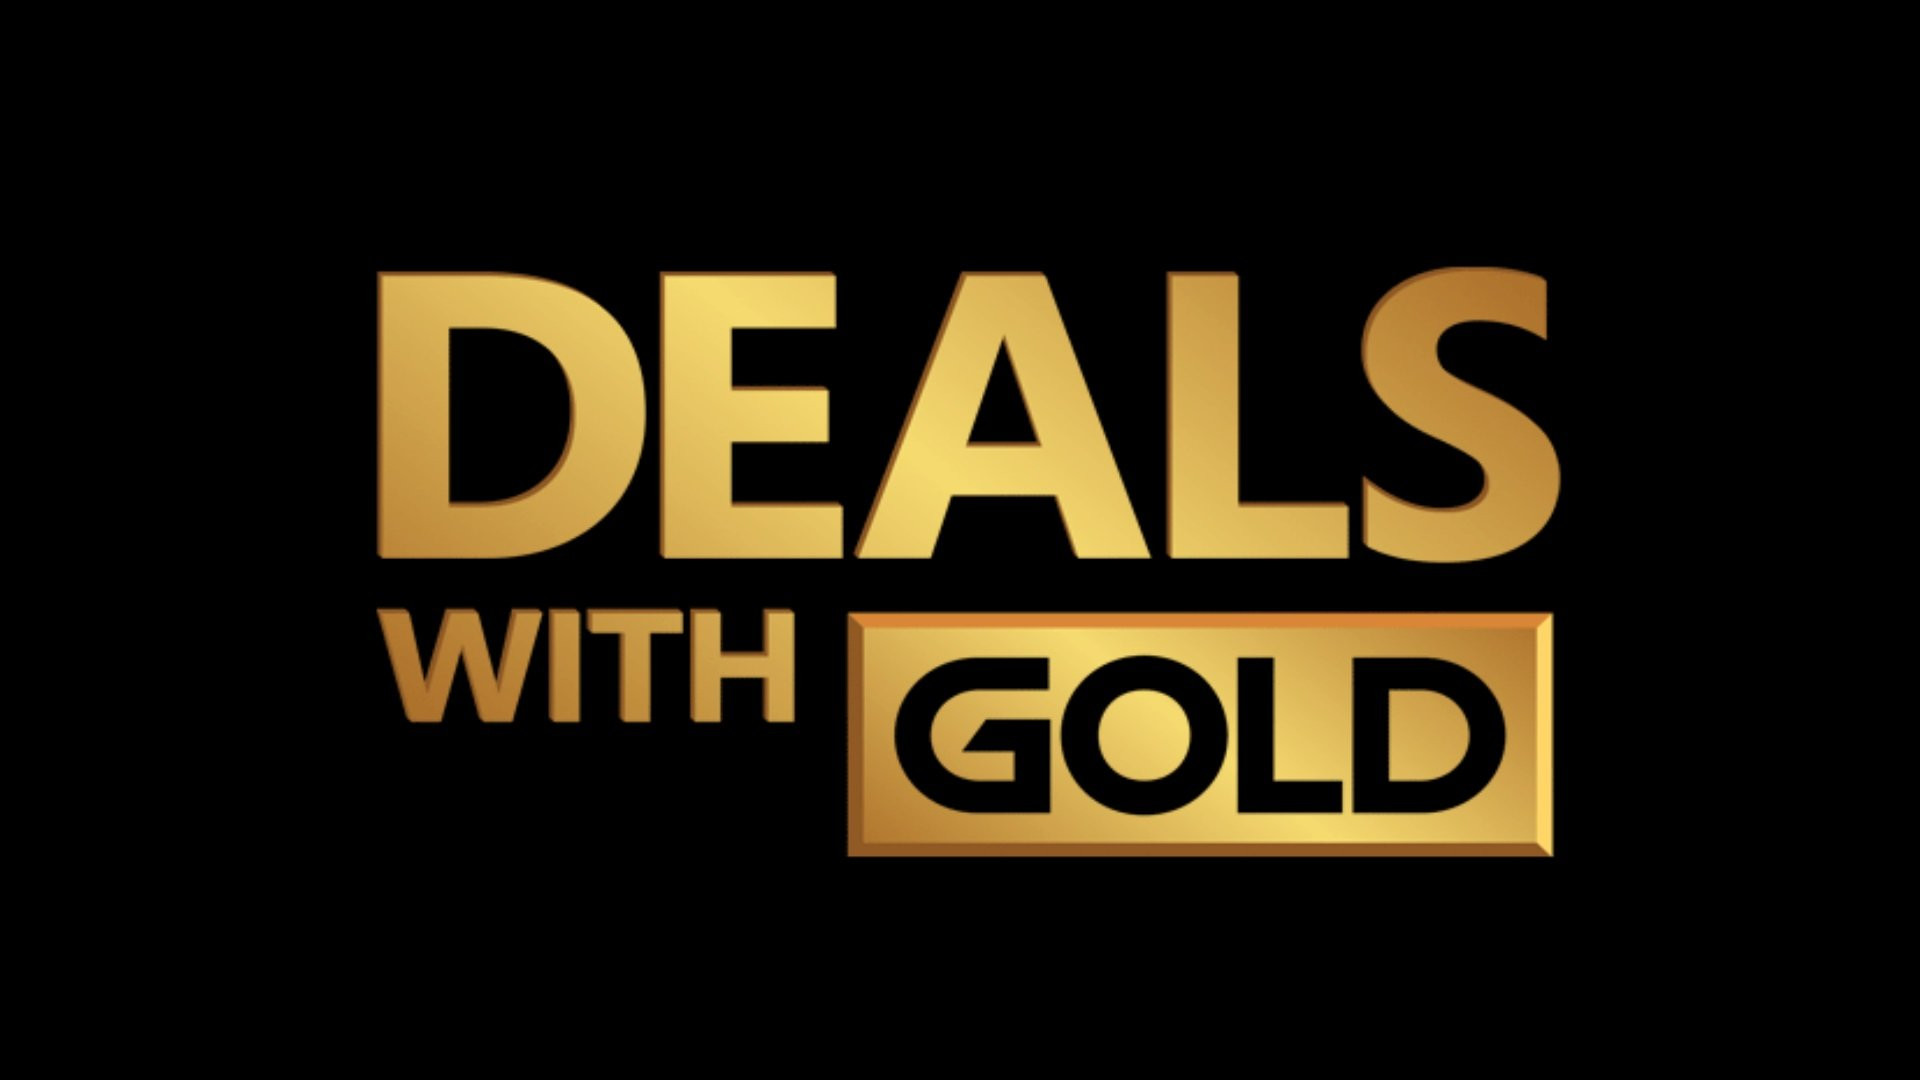 Deals with Gold semaine 33